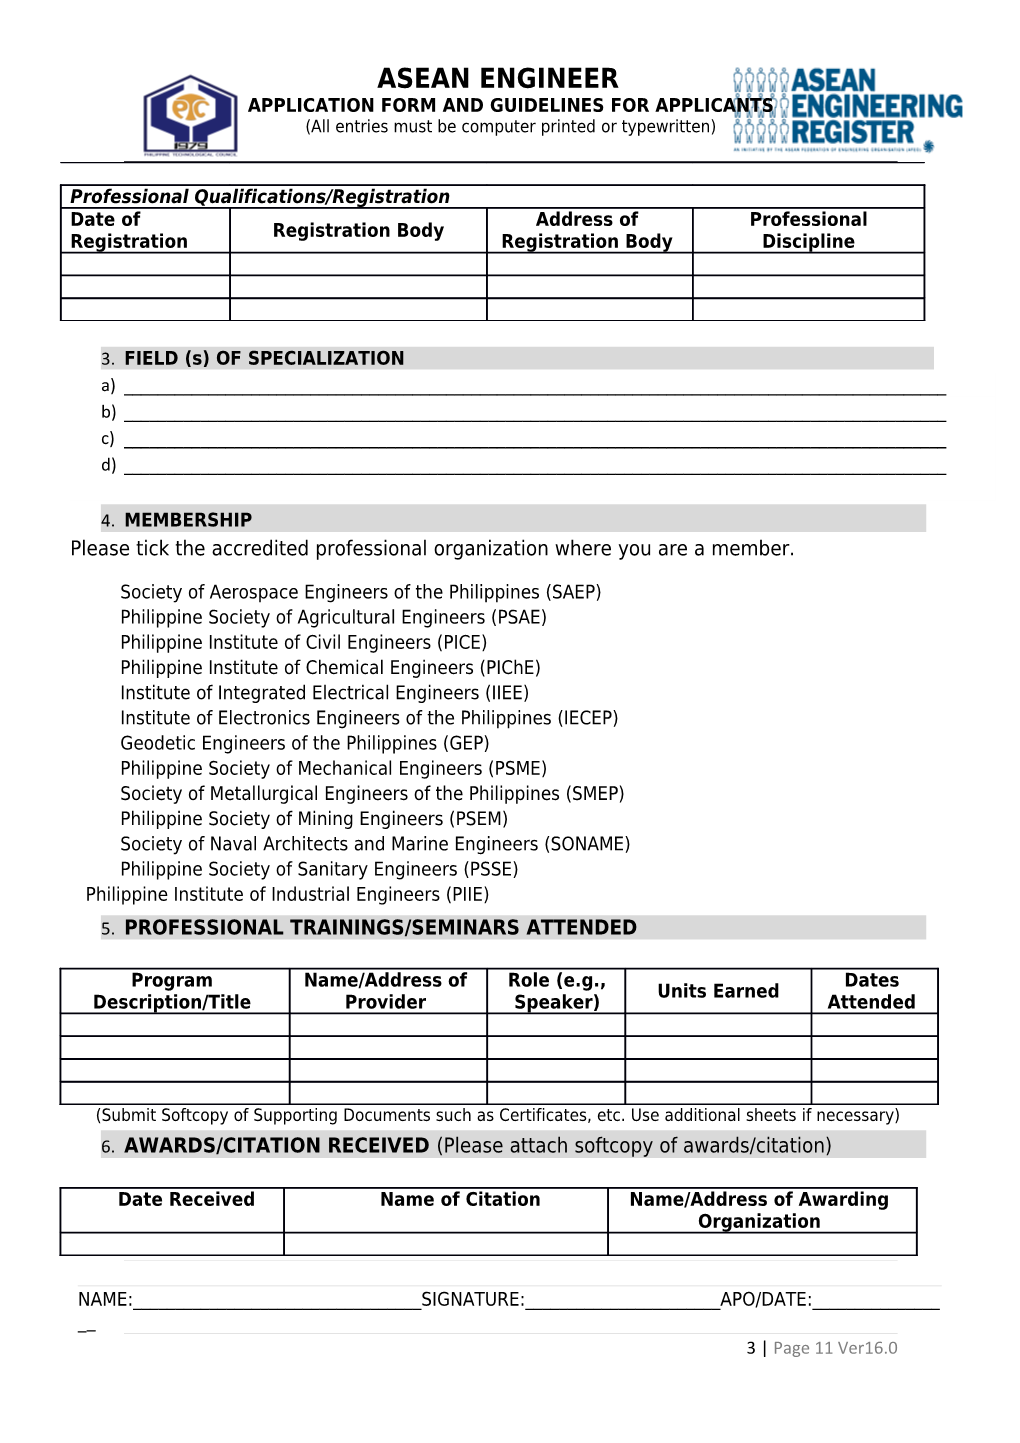 Application Form and Guidelines for Applicants